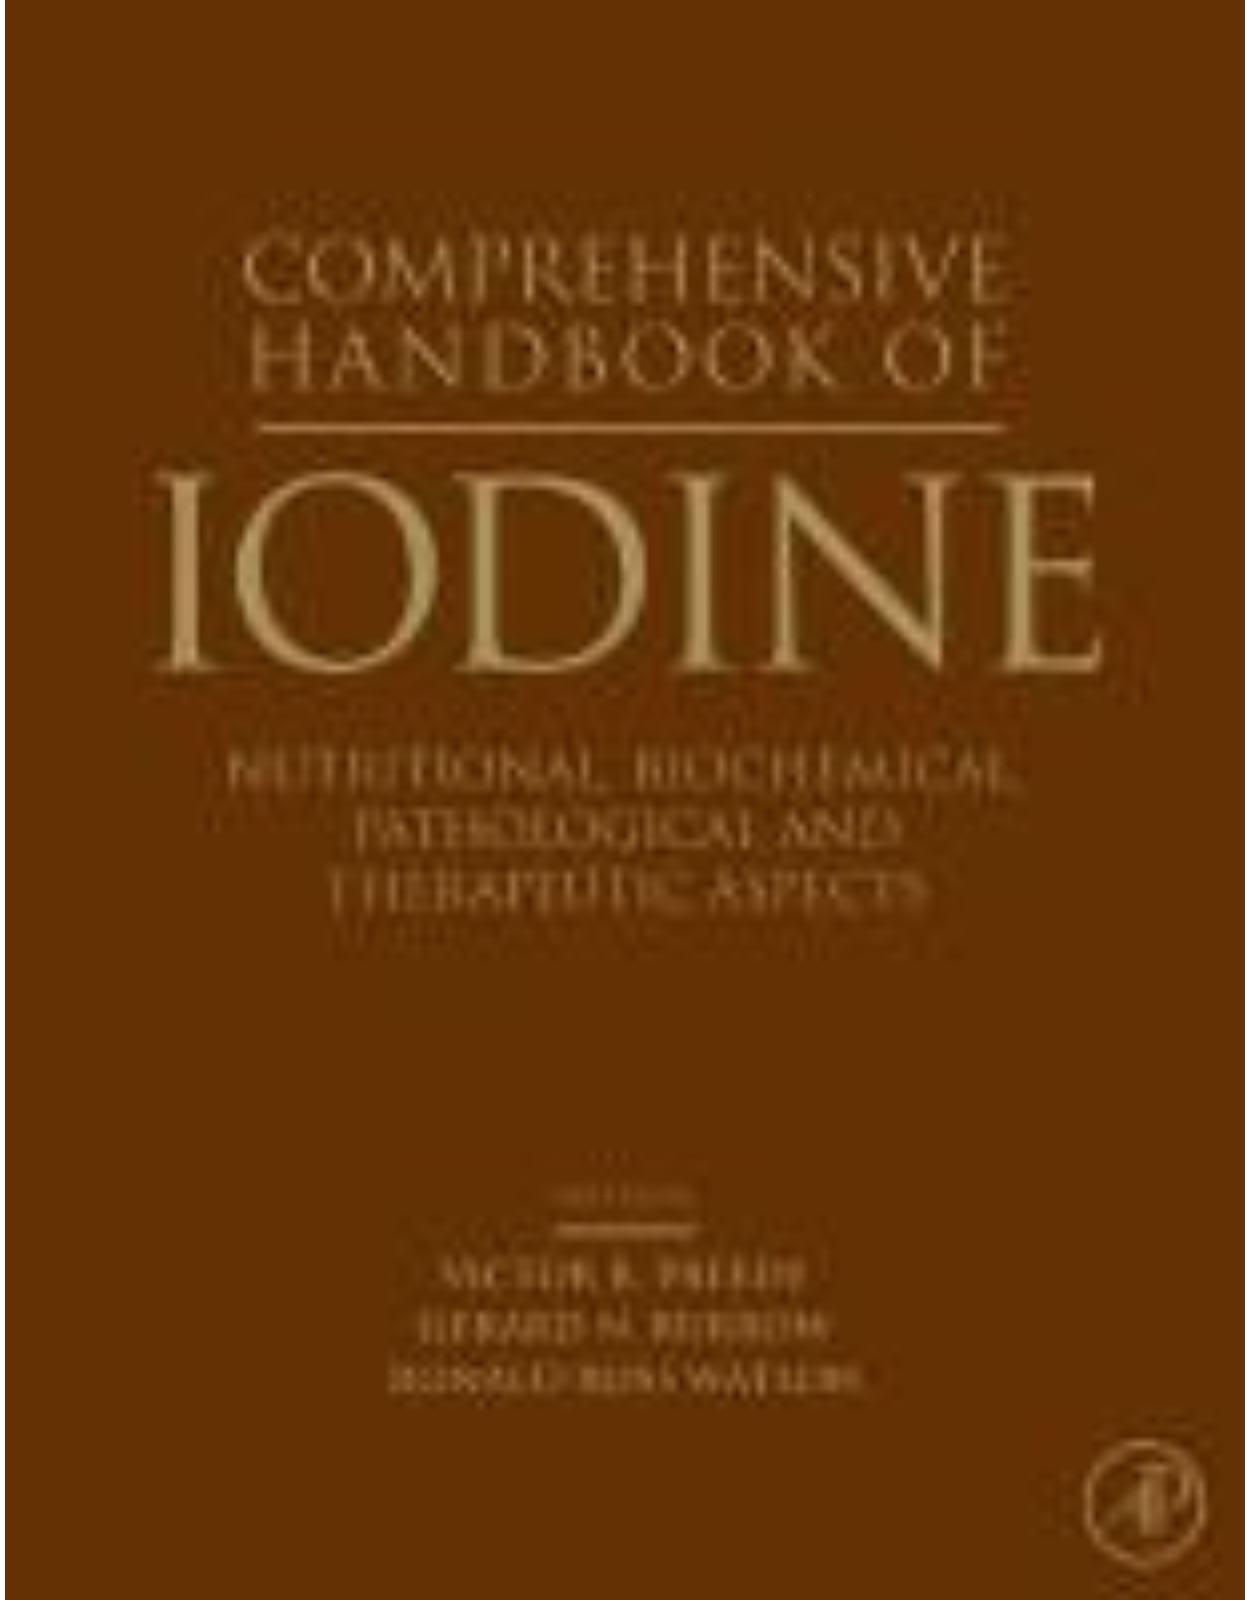 Comprehensive Handbook of Iodine: Nutritional, Biochemical, Pathological and Therapeutic Aspects